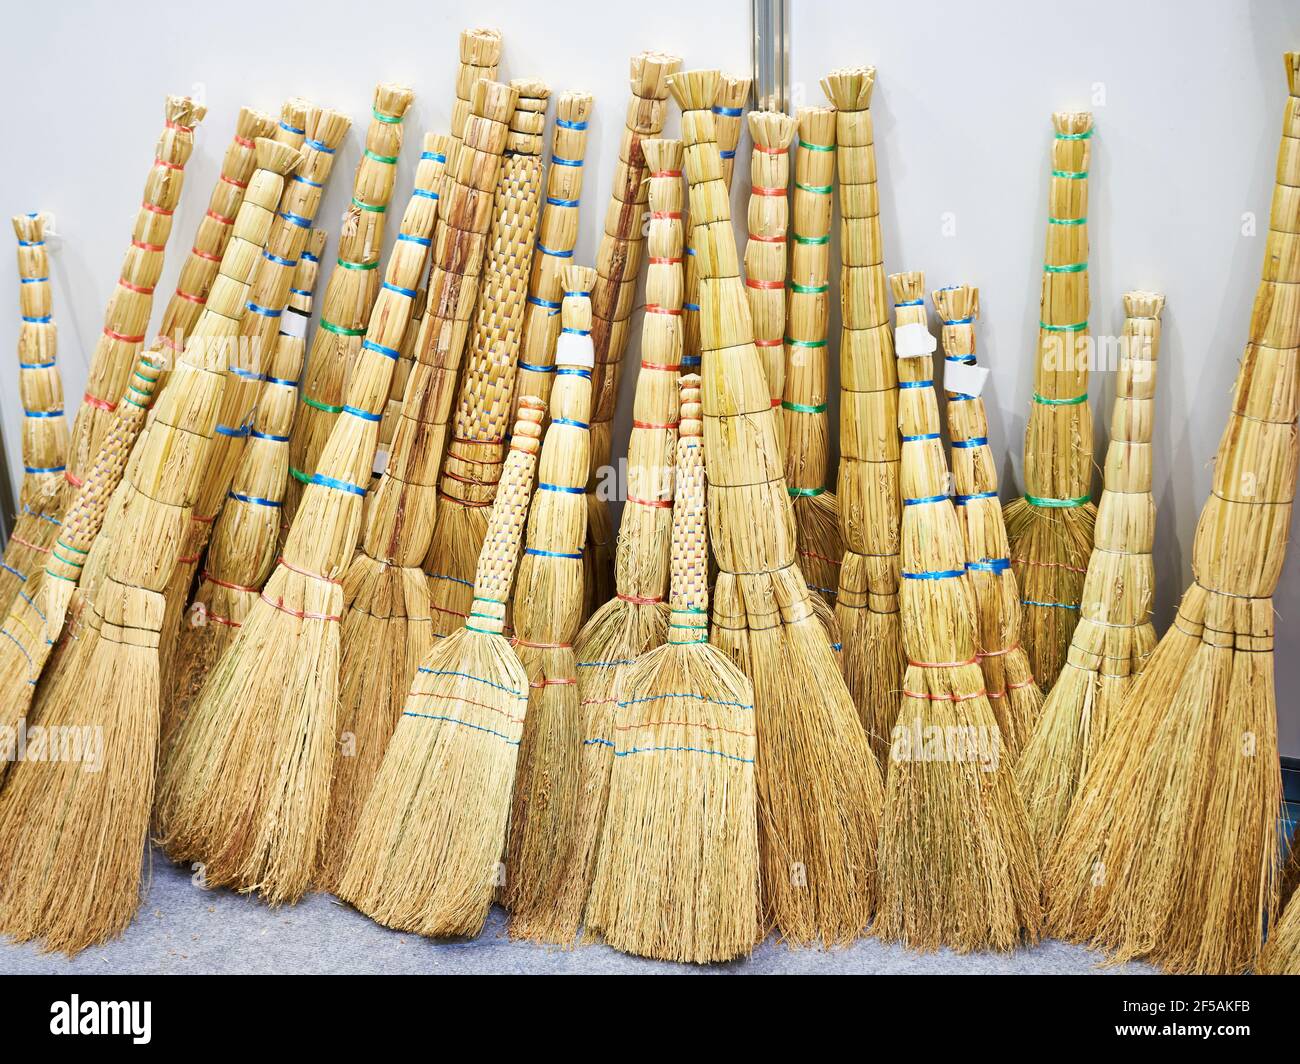 Besoms as household implement in the store Stock Photo